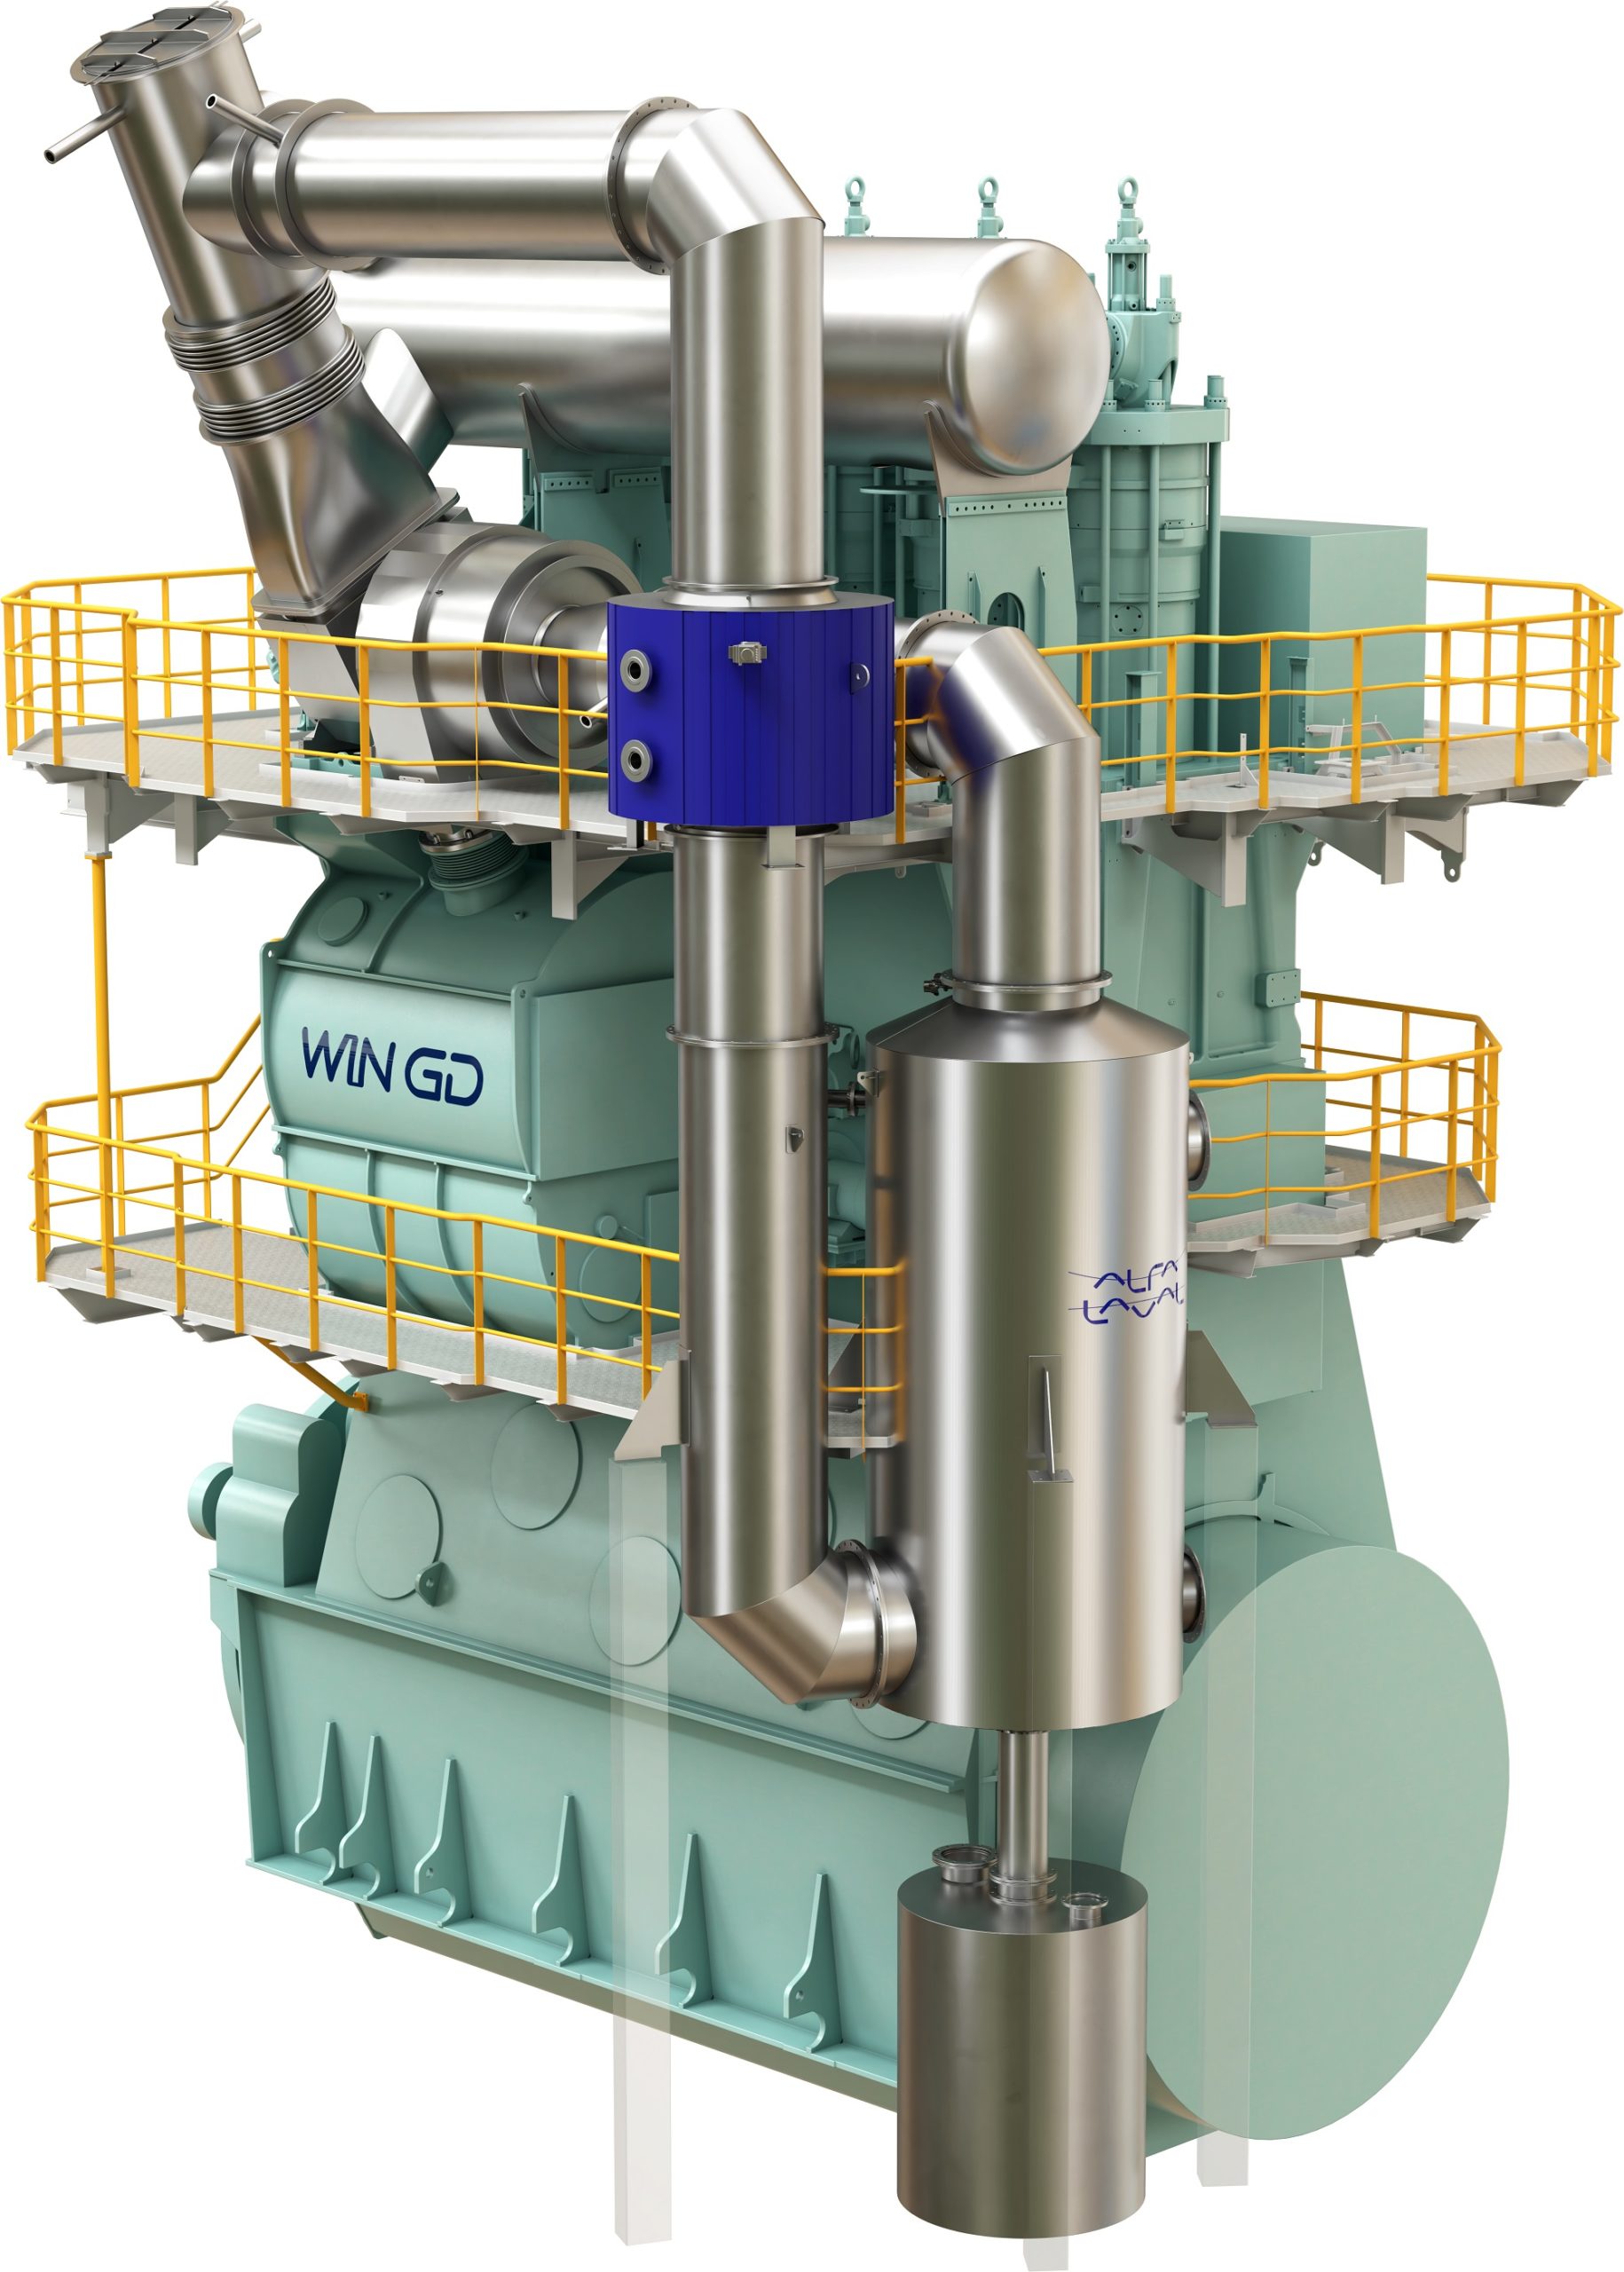 Alfa Laval PureCool further expands Alfa Laval’s leadership in marine environmental solutions